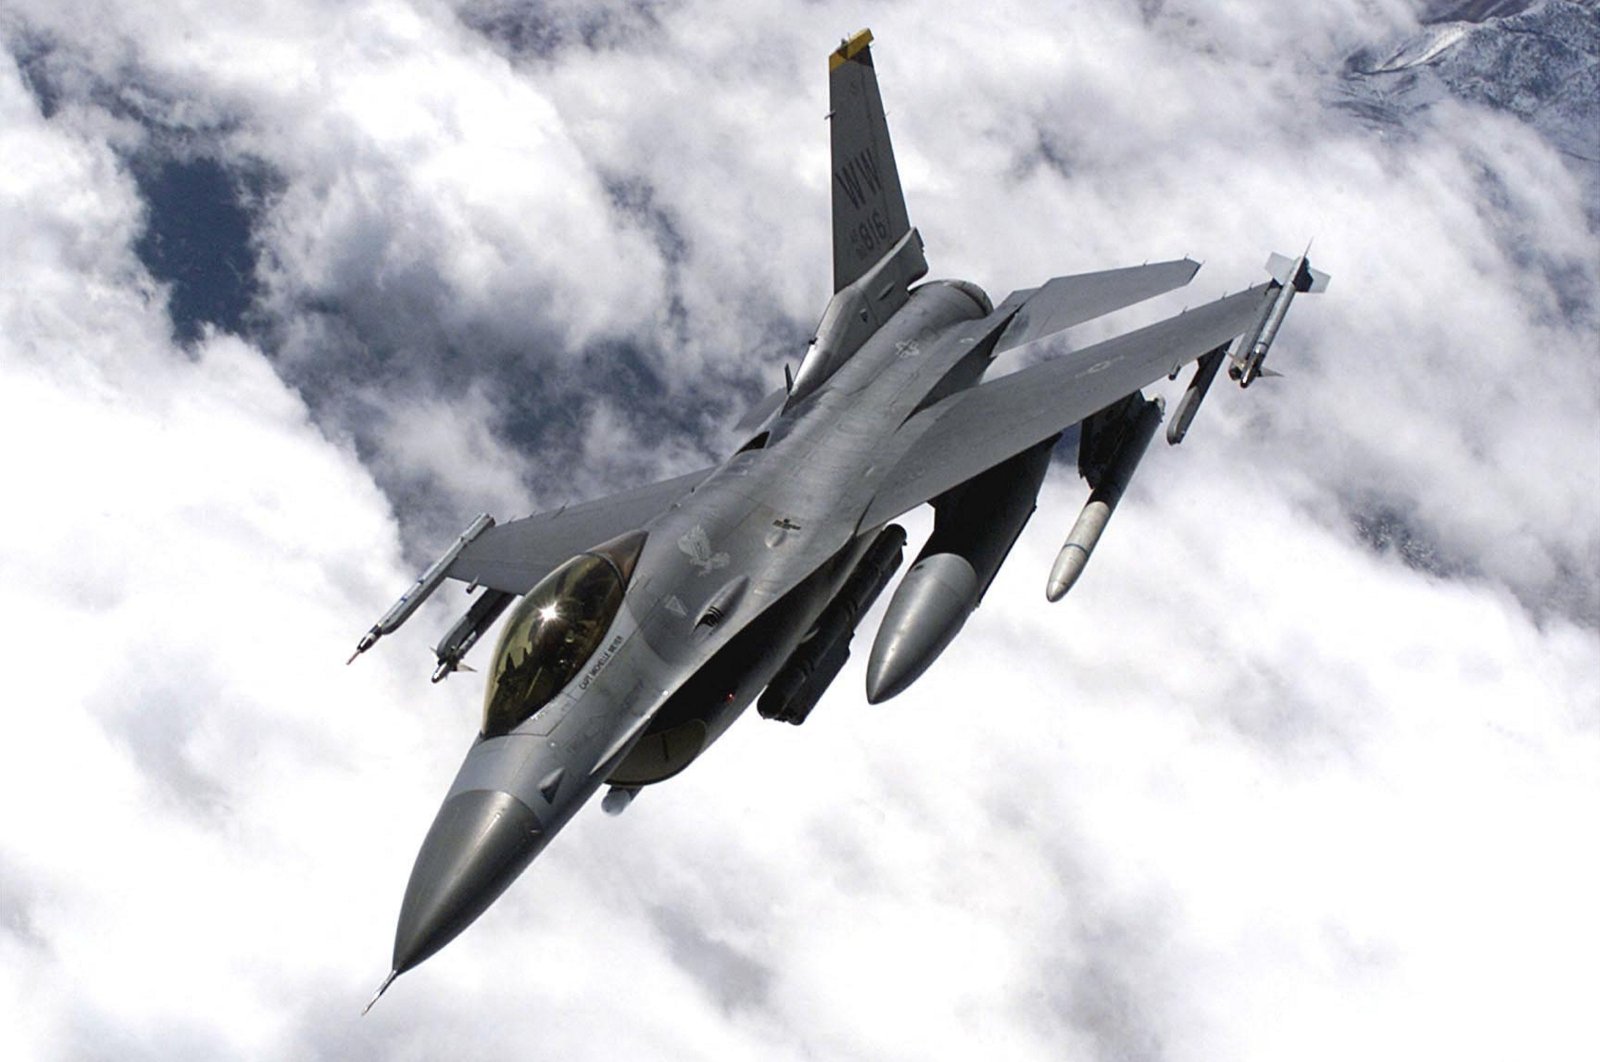 This undated U.S. Air Force file image courtesy of the U.S. Air Force obtained on Jan. 10, 2002, shows an F-16 in flight during training. (AFP Photo)